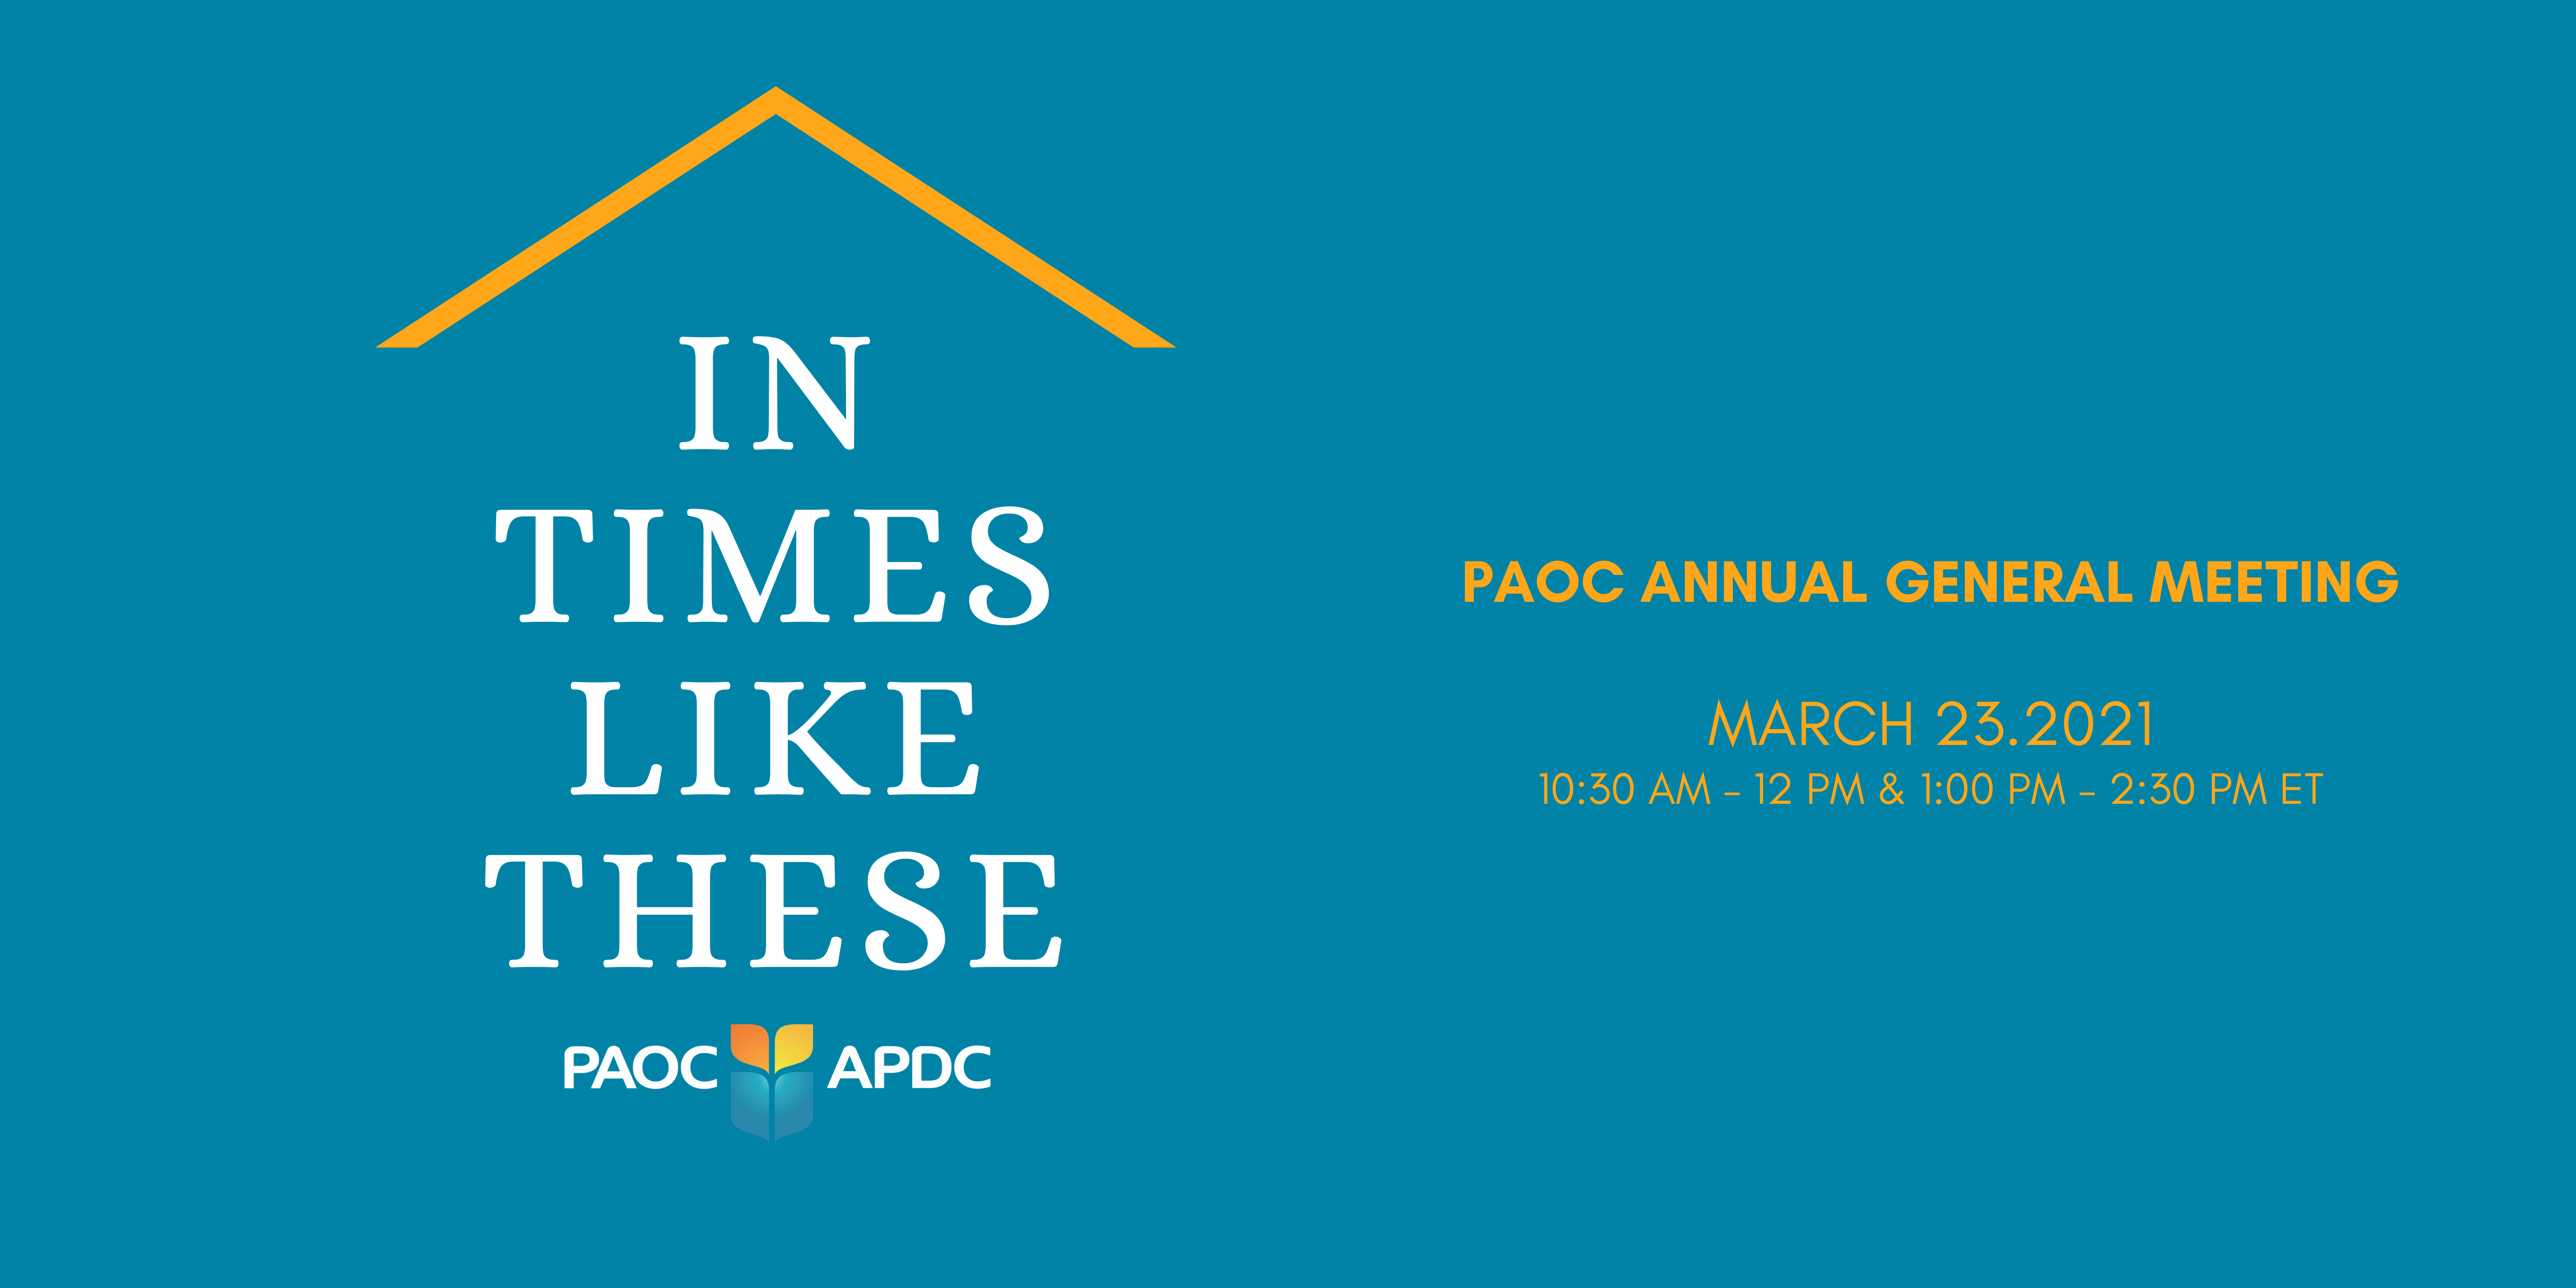 Eventbrite Banner - jpg - PAOC AGM 2021 Branding - In Times Like These